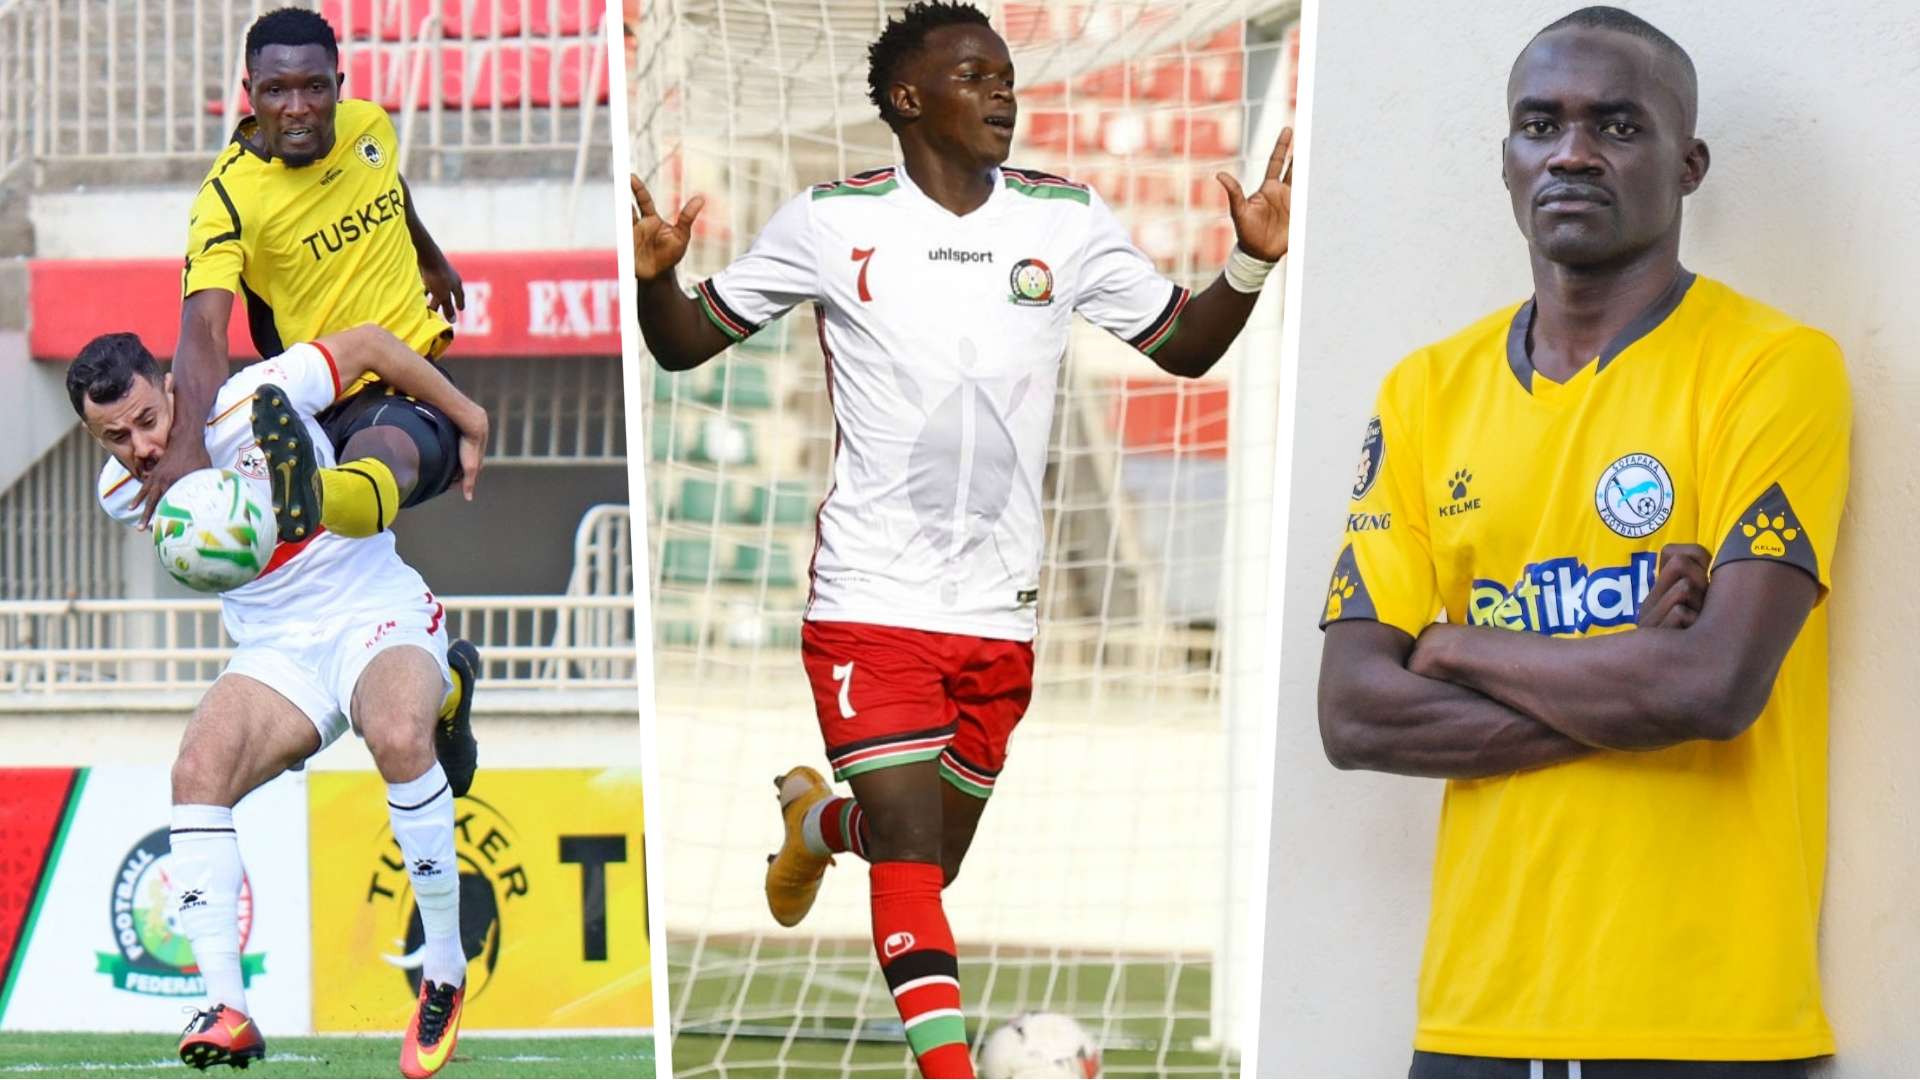 tusker new signings.